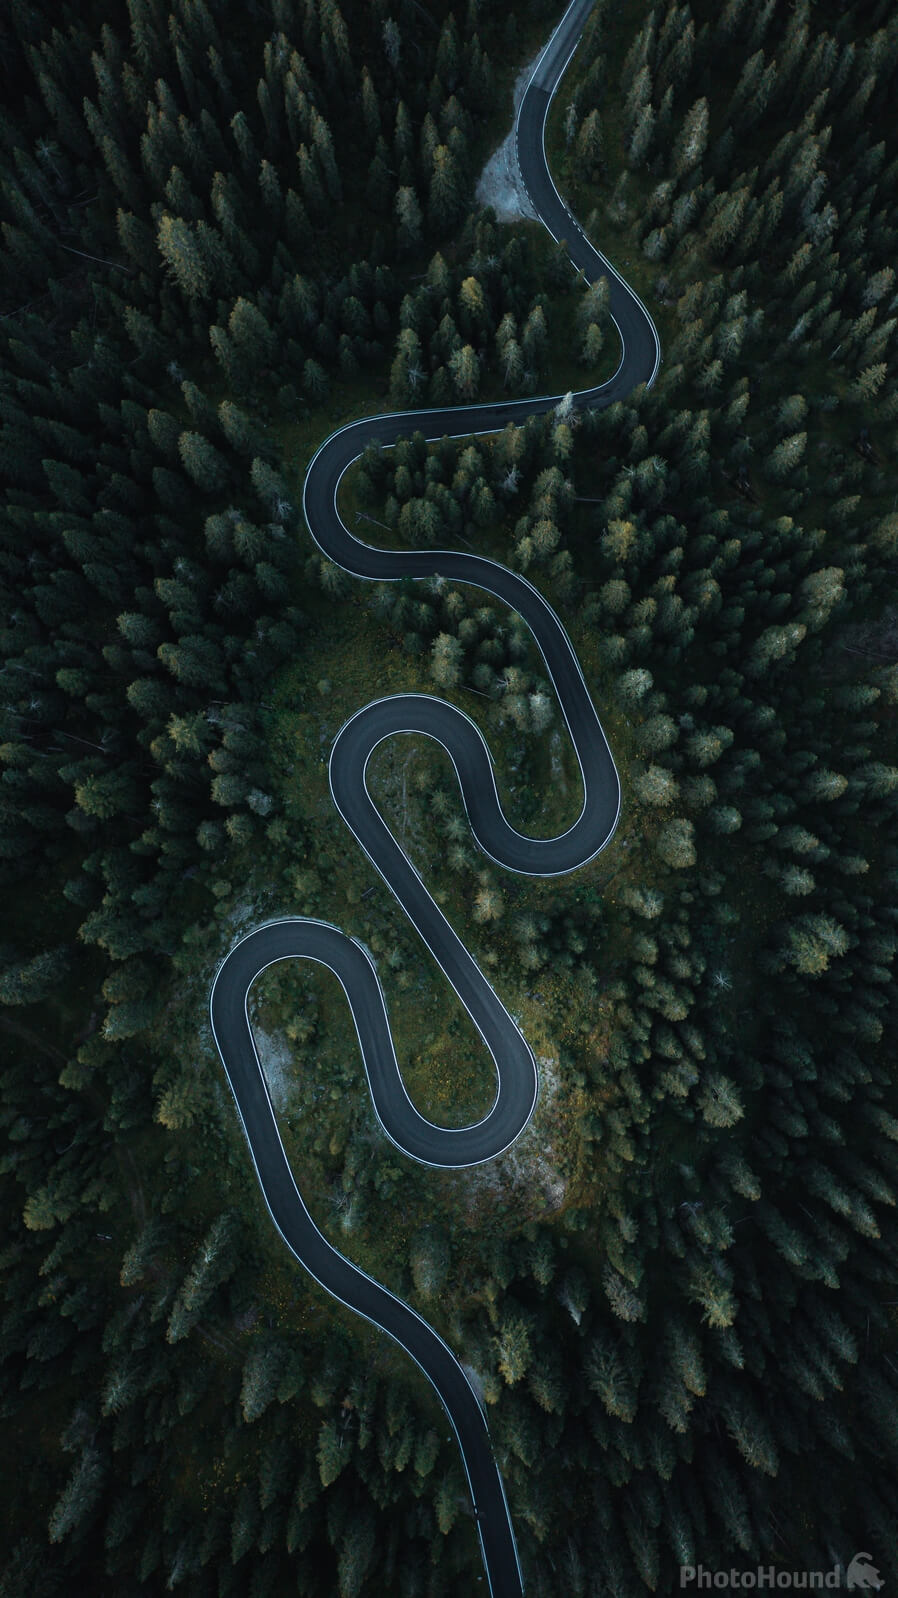 Image of Snake Road in Passo Giau by Jaime Escalera